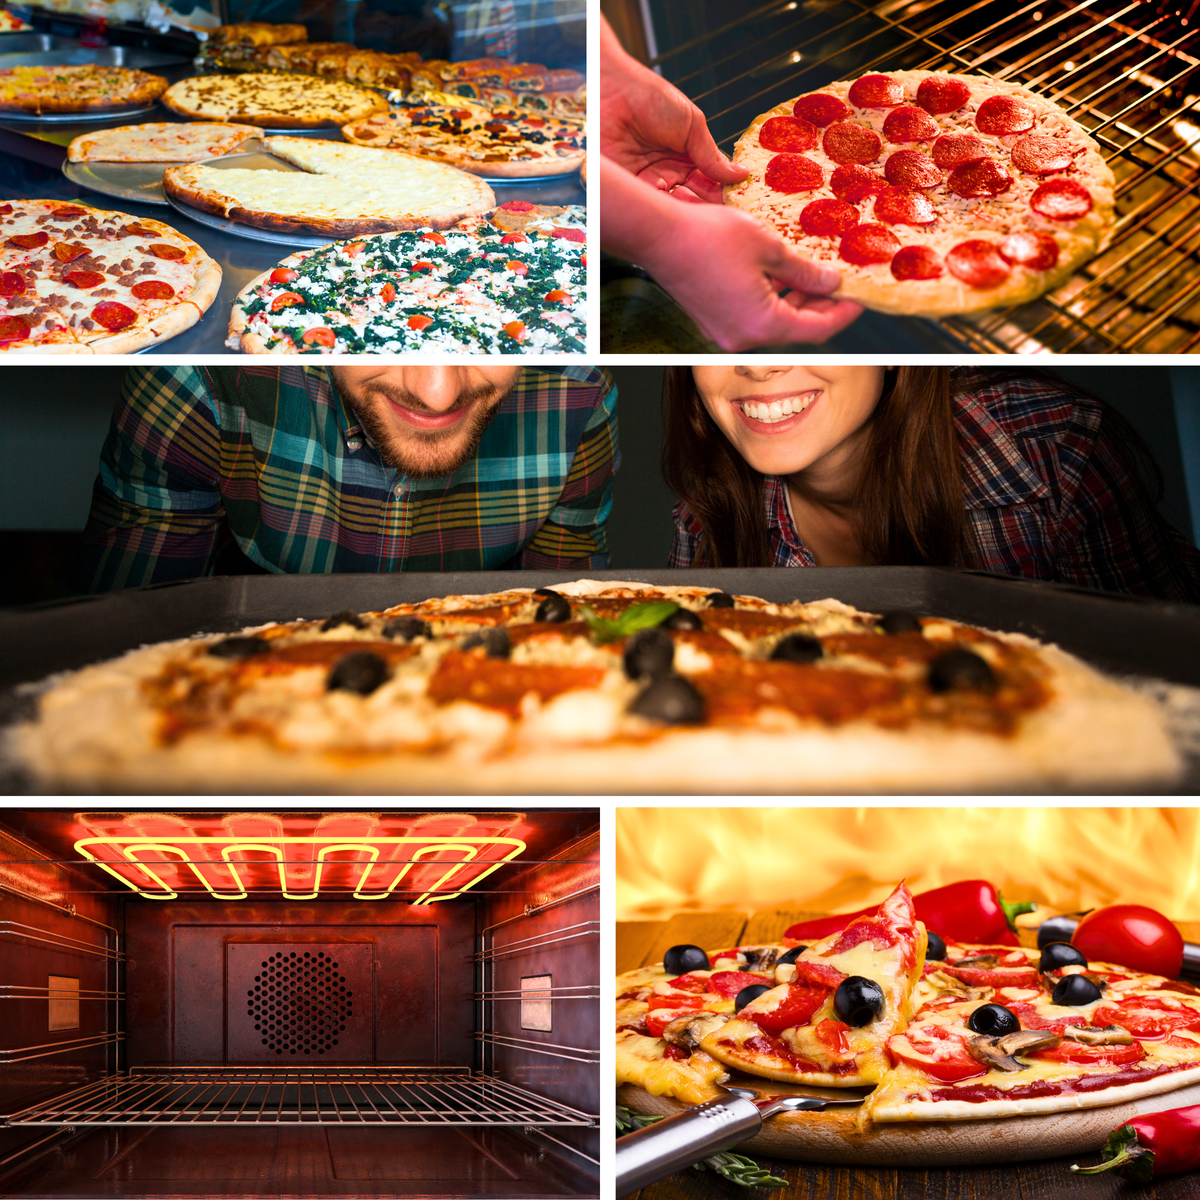 Pizzas from indoor pizza oven, couple looking at pizza cooking, electric pizza oven, pizza in wood fired pizza oven.